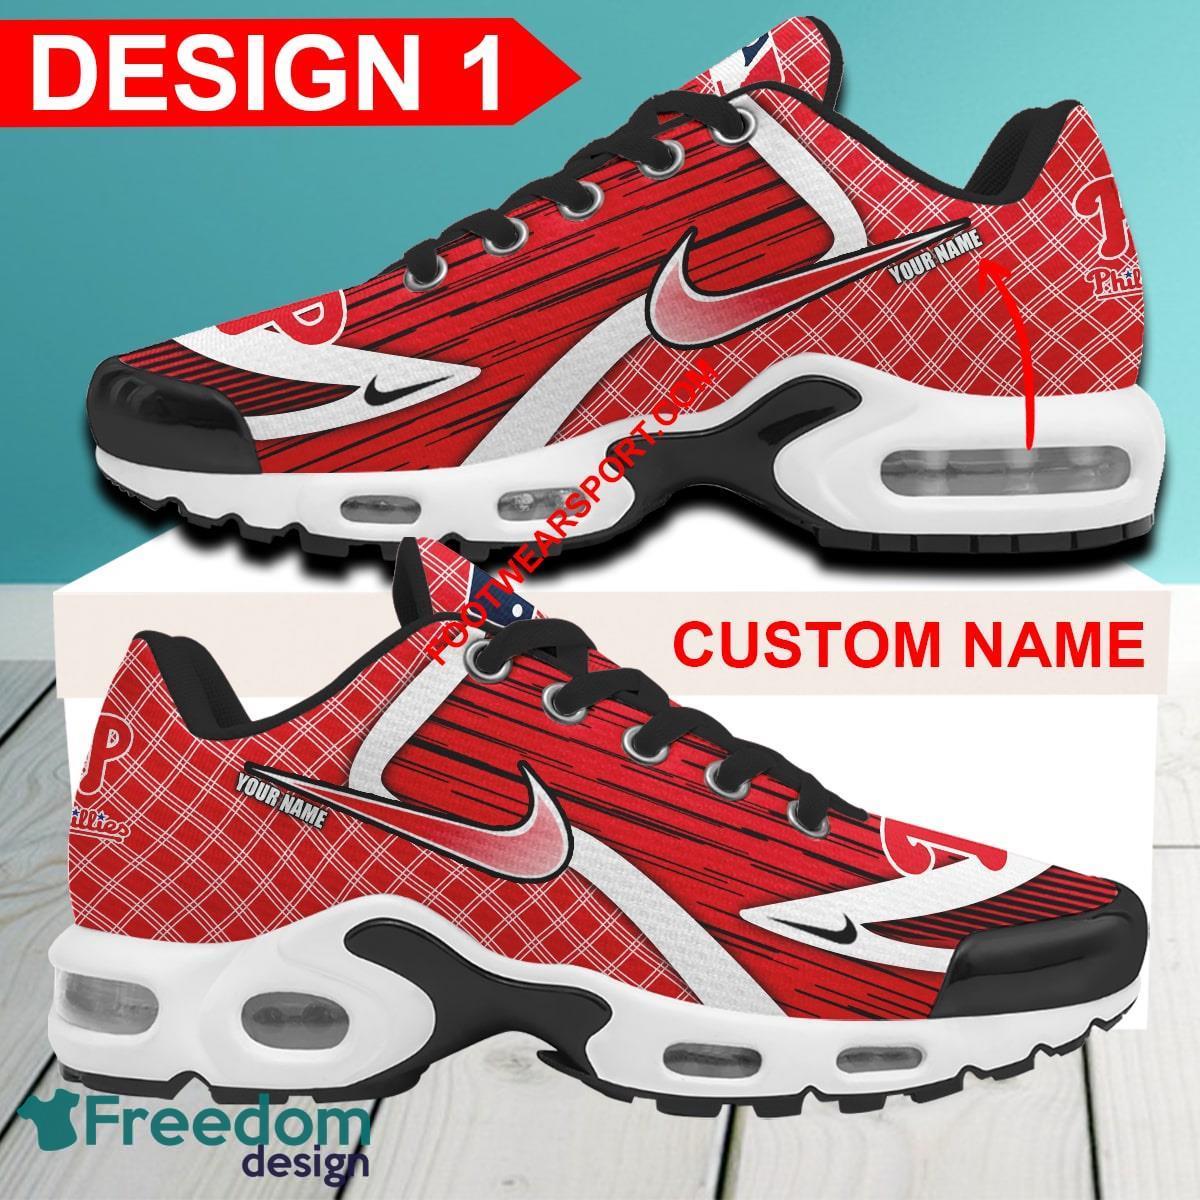 Custom Name MLB Philadelphia Phillies Air Cushion Sport Shoes TN Sneakers For Fans Sneakers Gift - MLB Philadelphia Phillies Air Cushion Sport Shoes Style 1 TN Sneakers